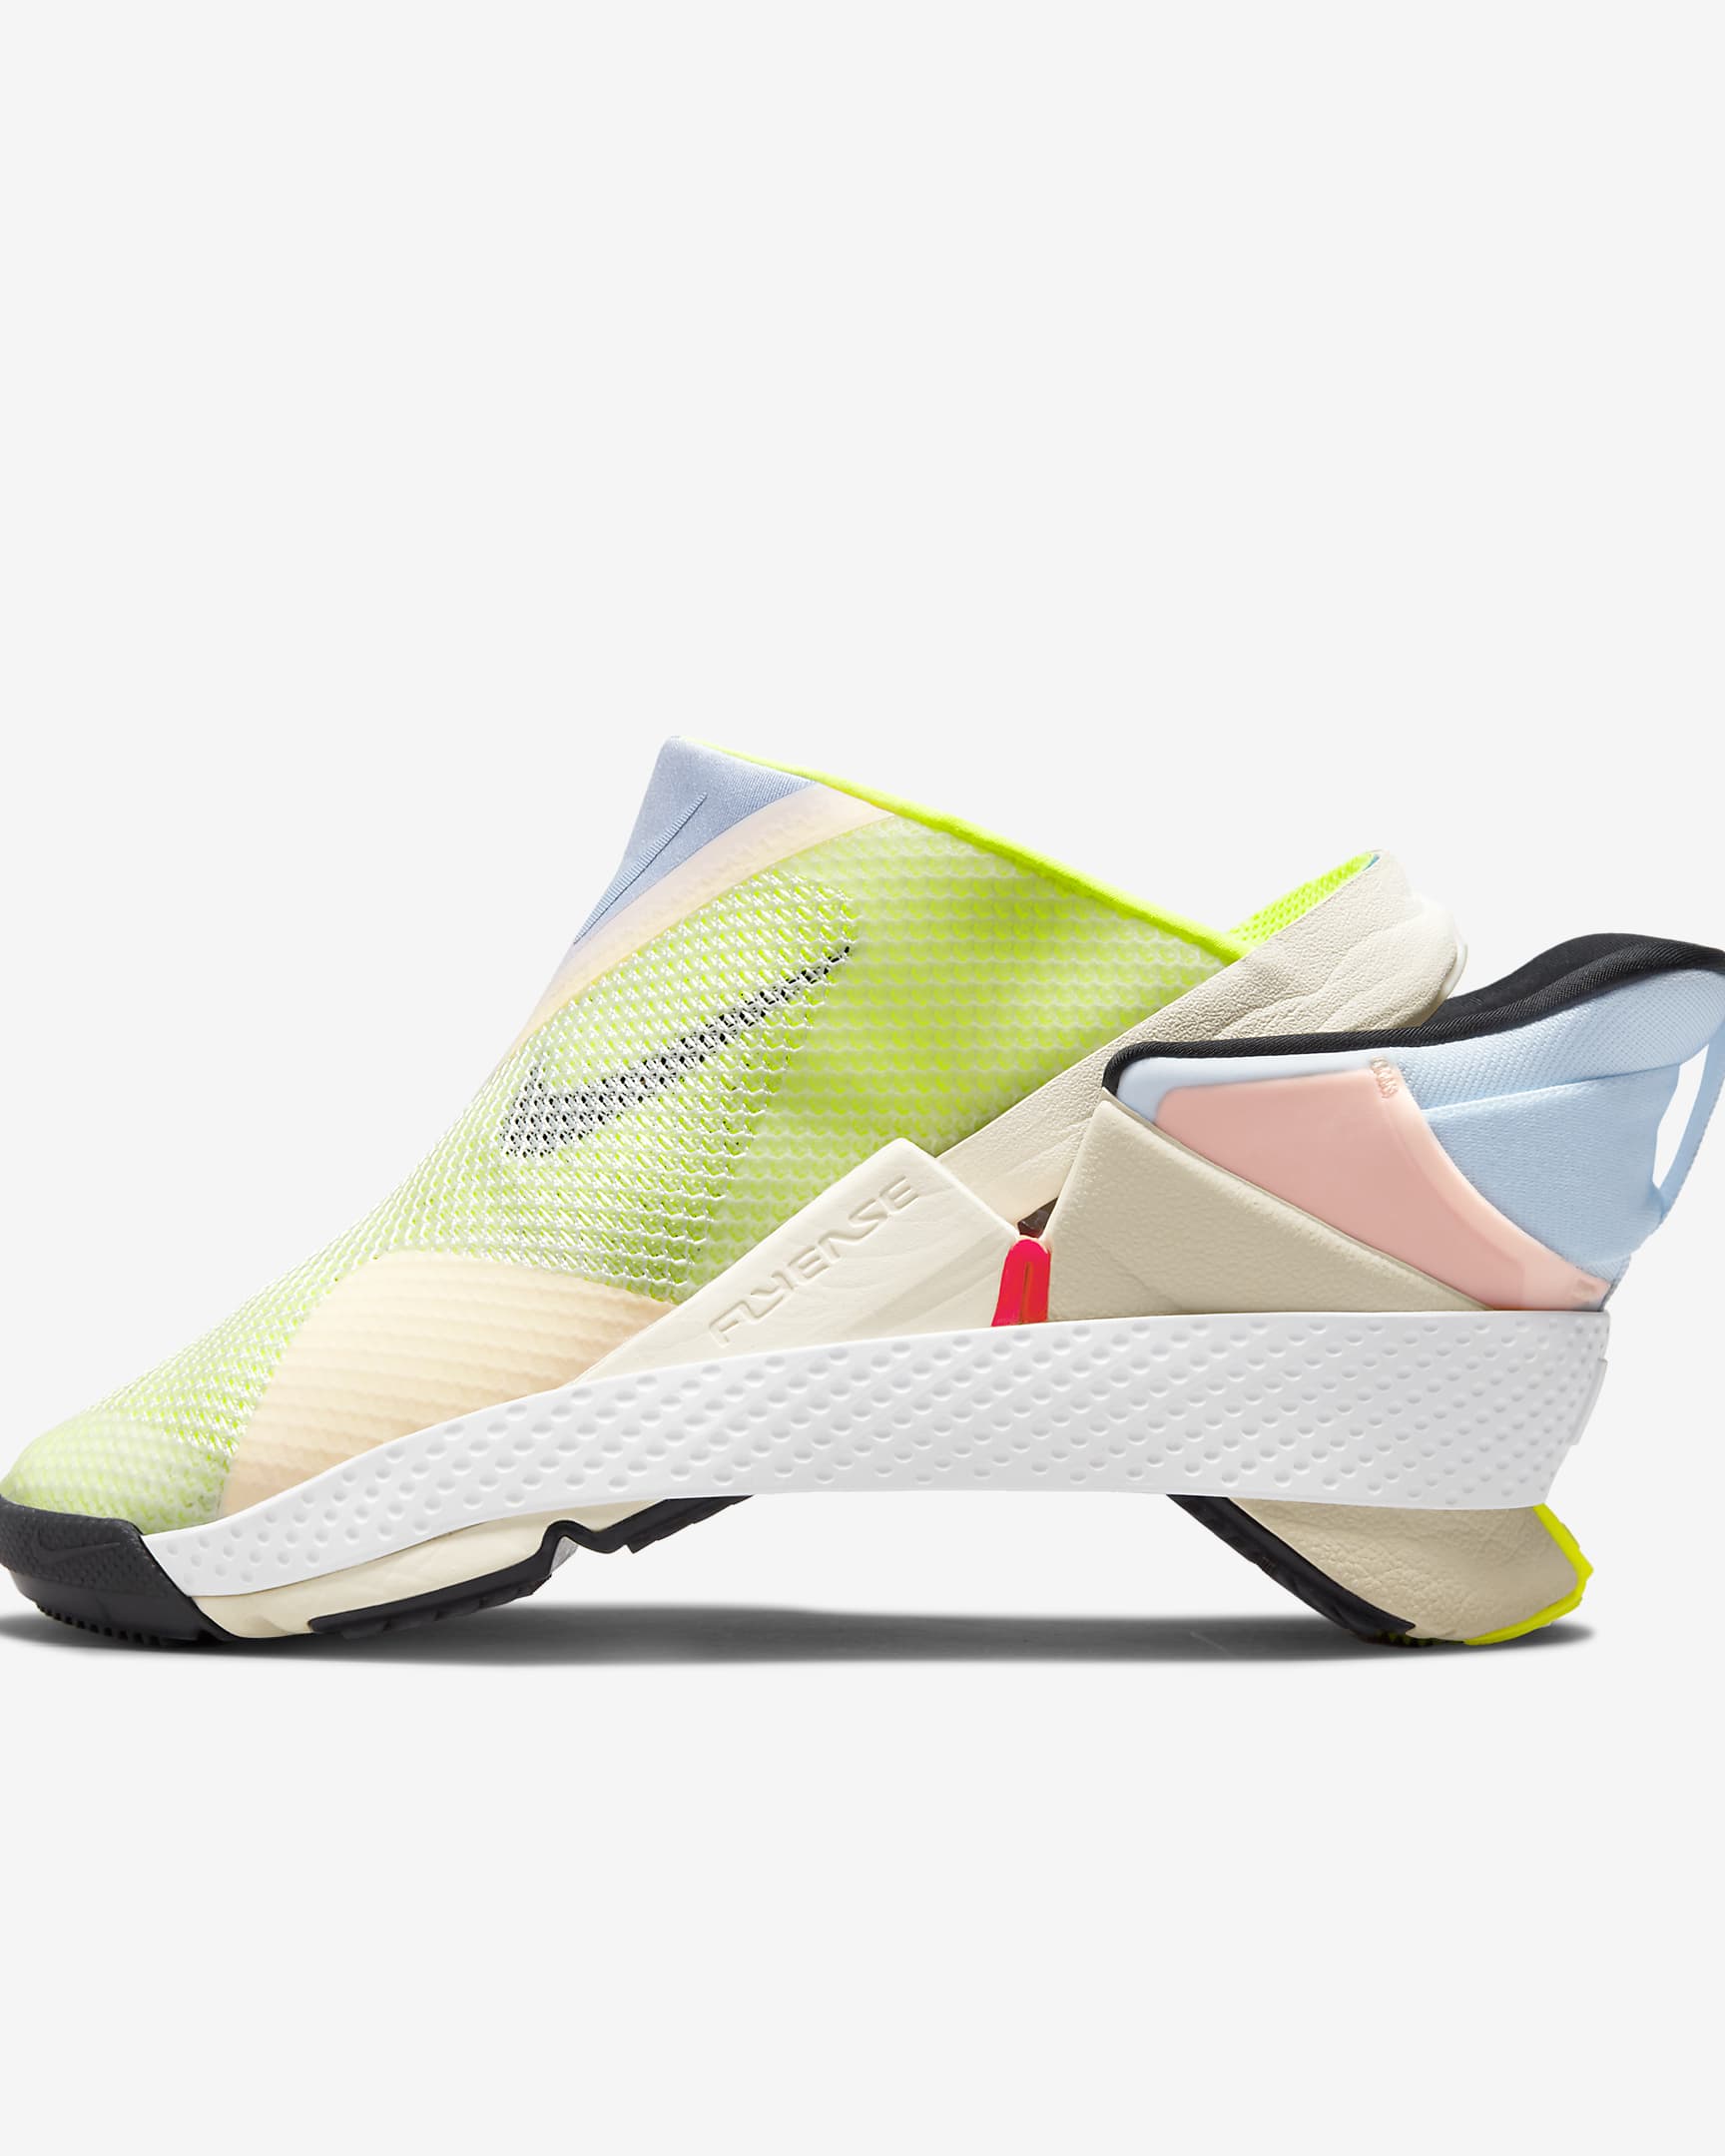 Nike Launches Go Flyease - The Handsfree Shoes